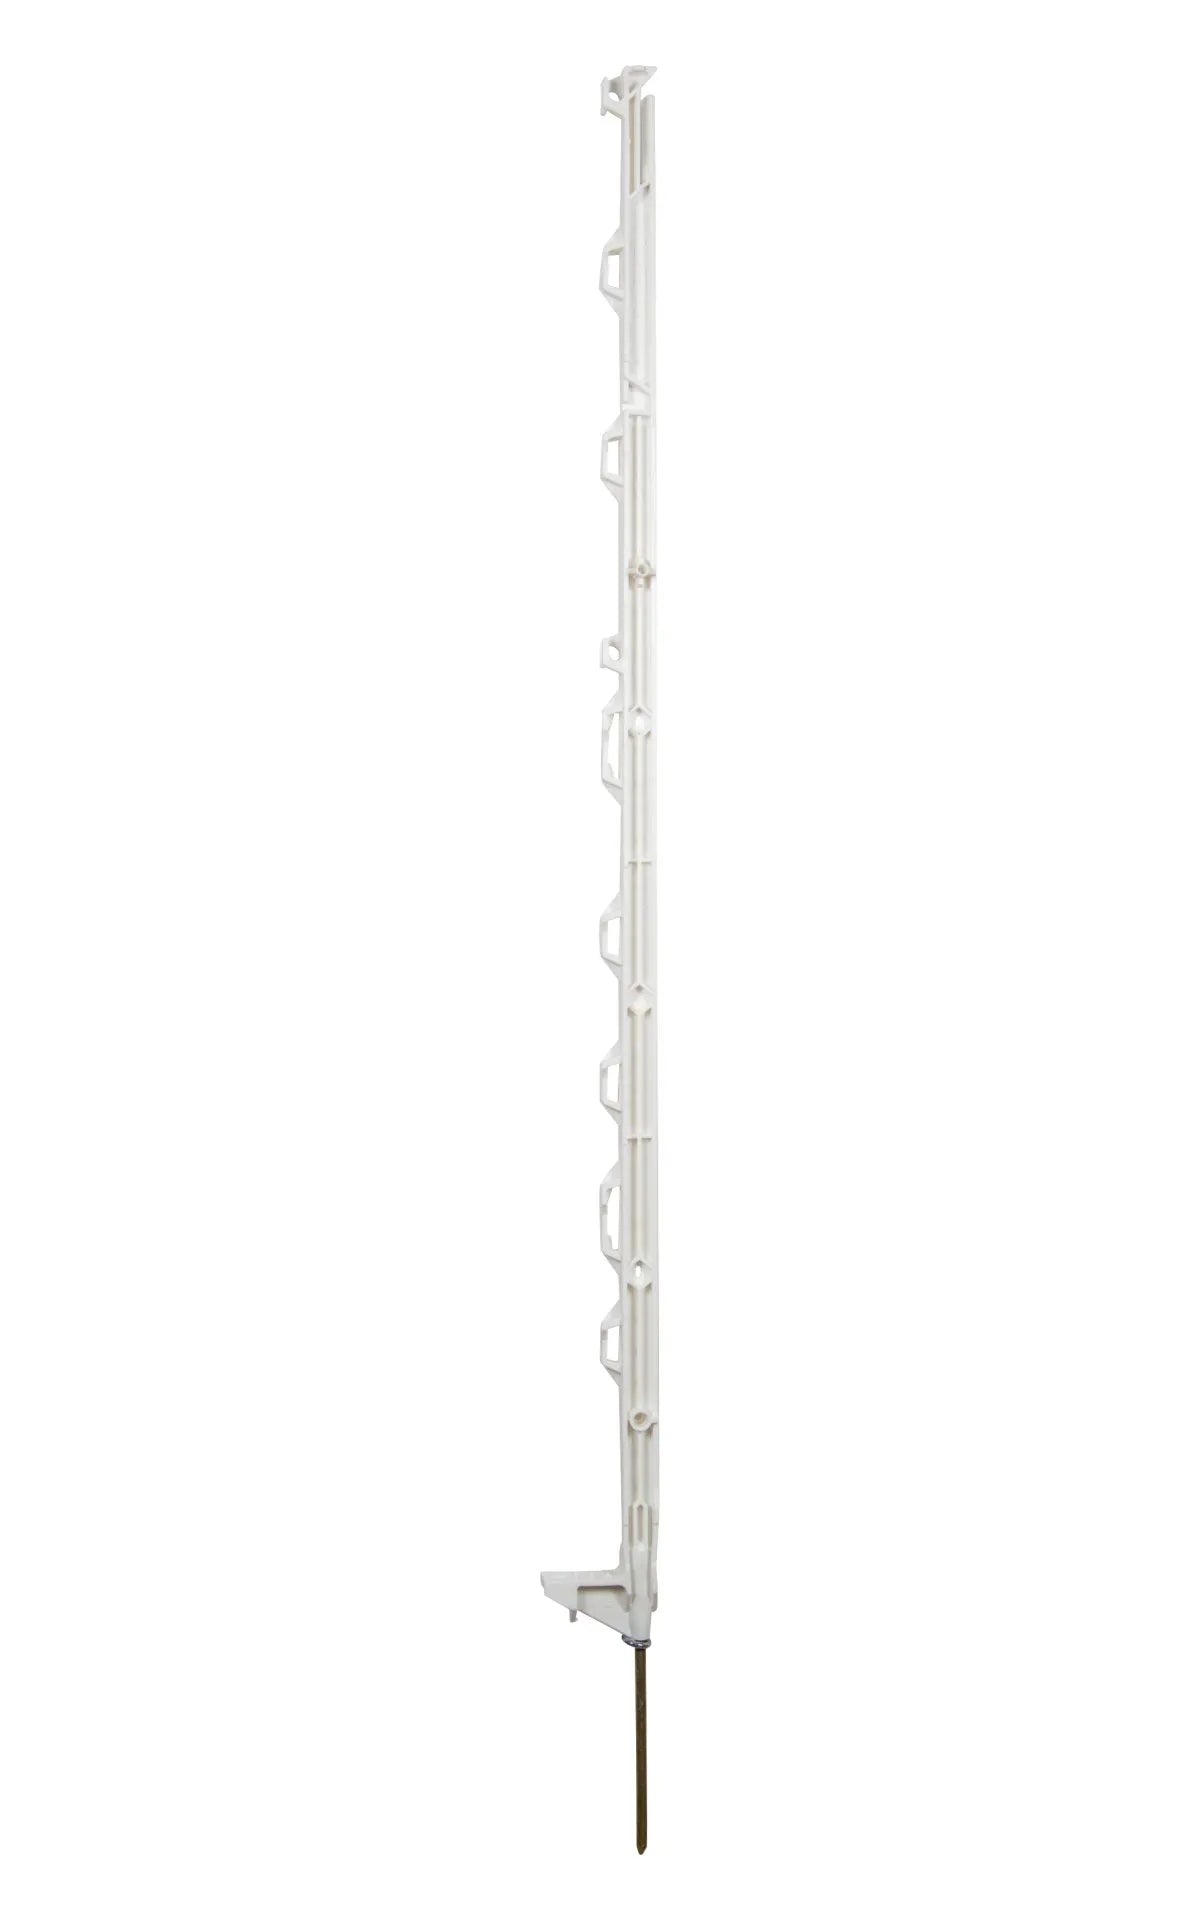 Hotline - White Plastic Multiwire Electric Fence Posts 104cm - (10 Pack) *15% OFF!*